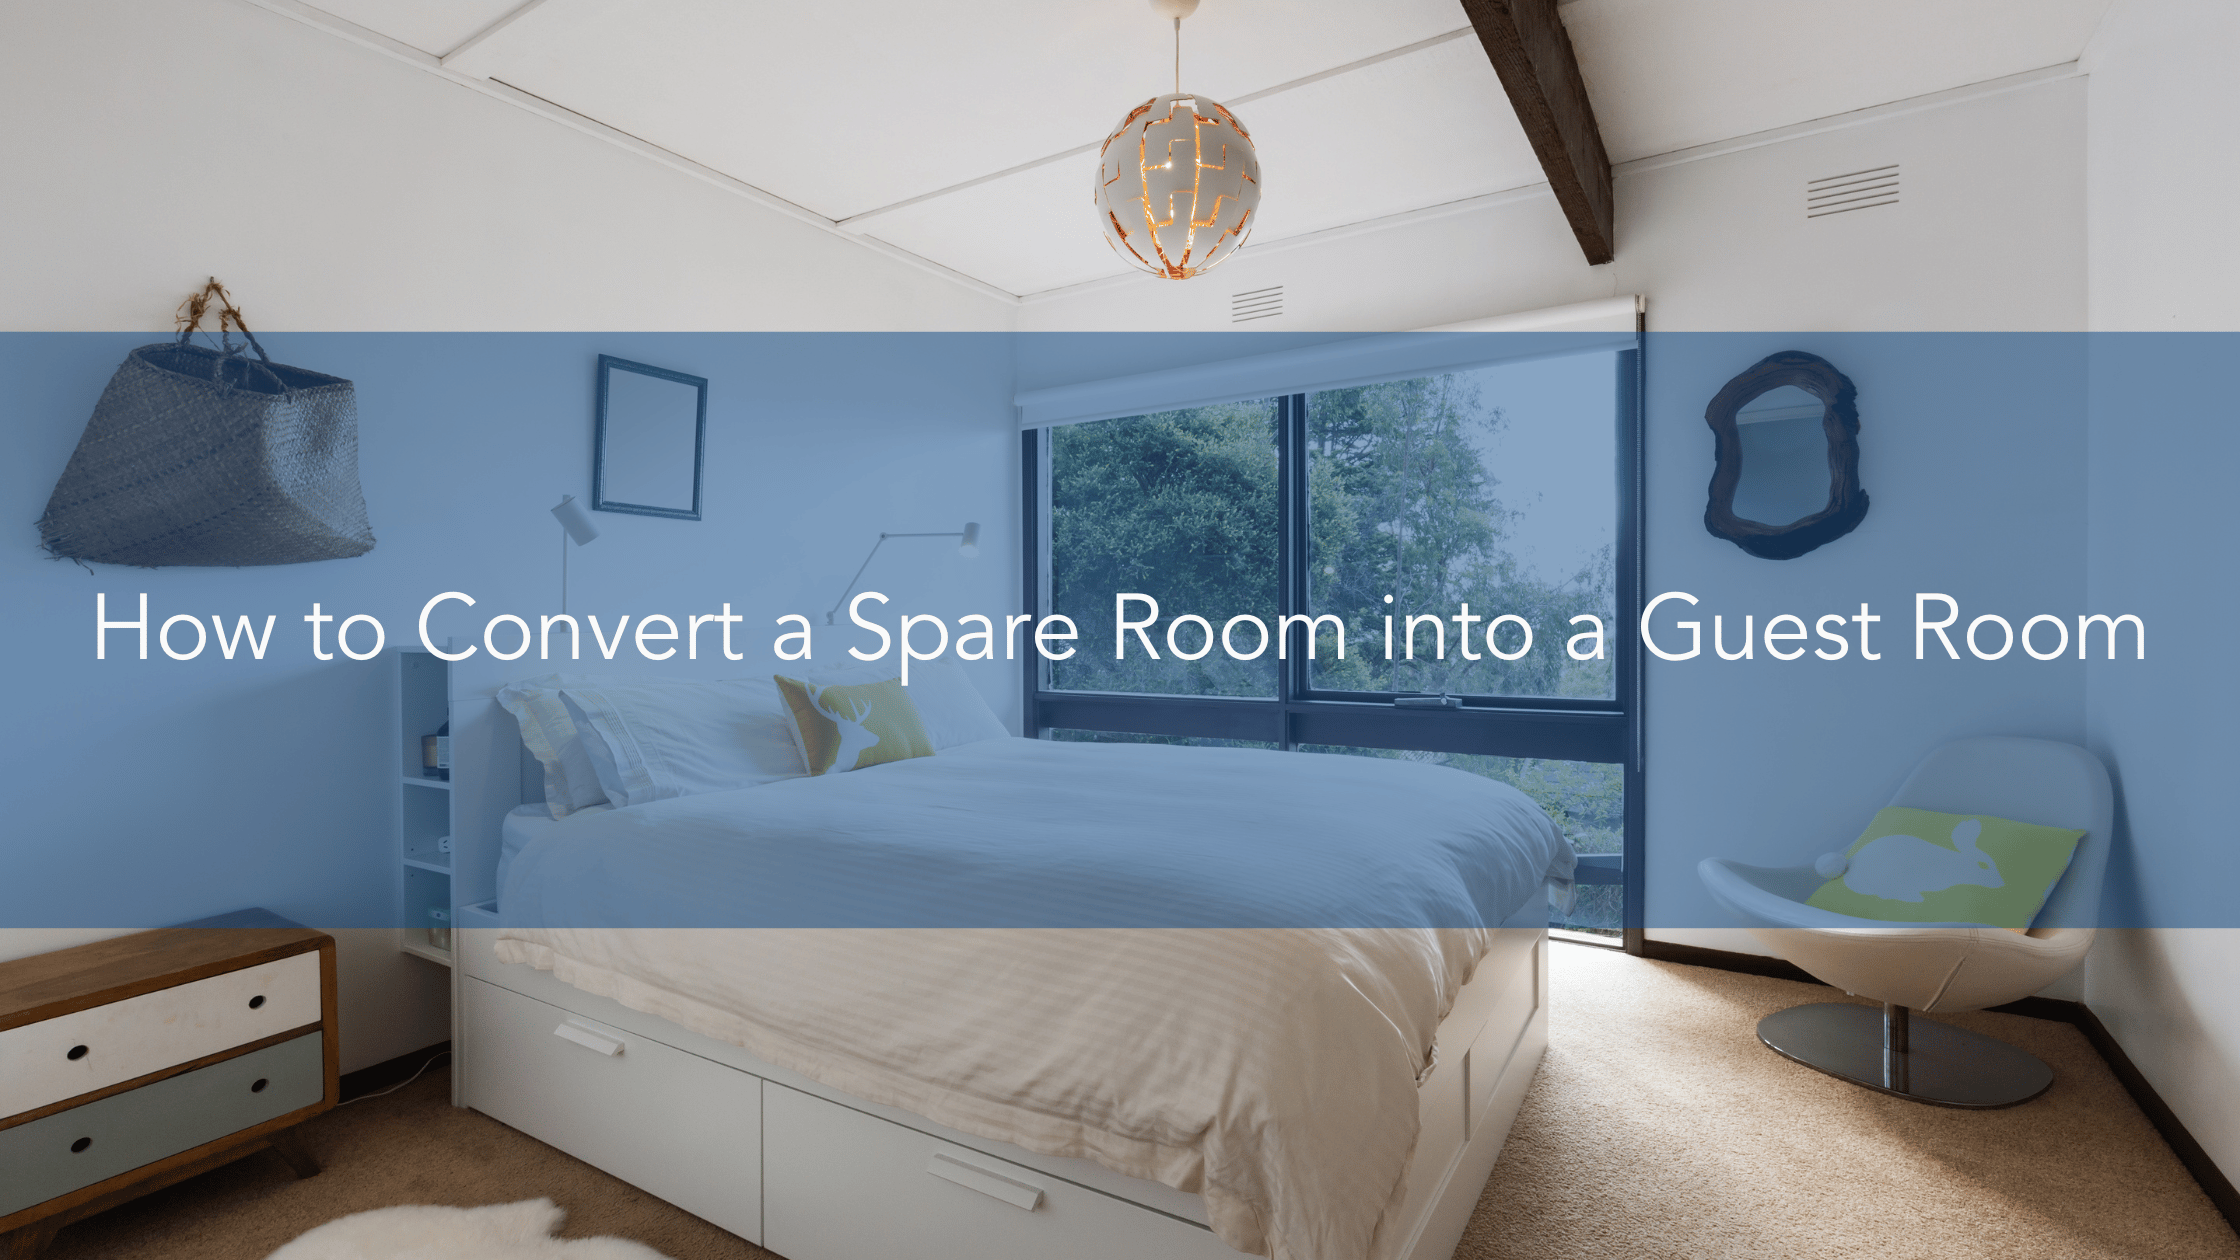 https://handymanconnection.com/wp-content/uploads/2022/11/How-to-Convert-a-Spare-Room-into-a-Guest-Room.png